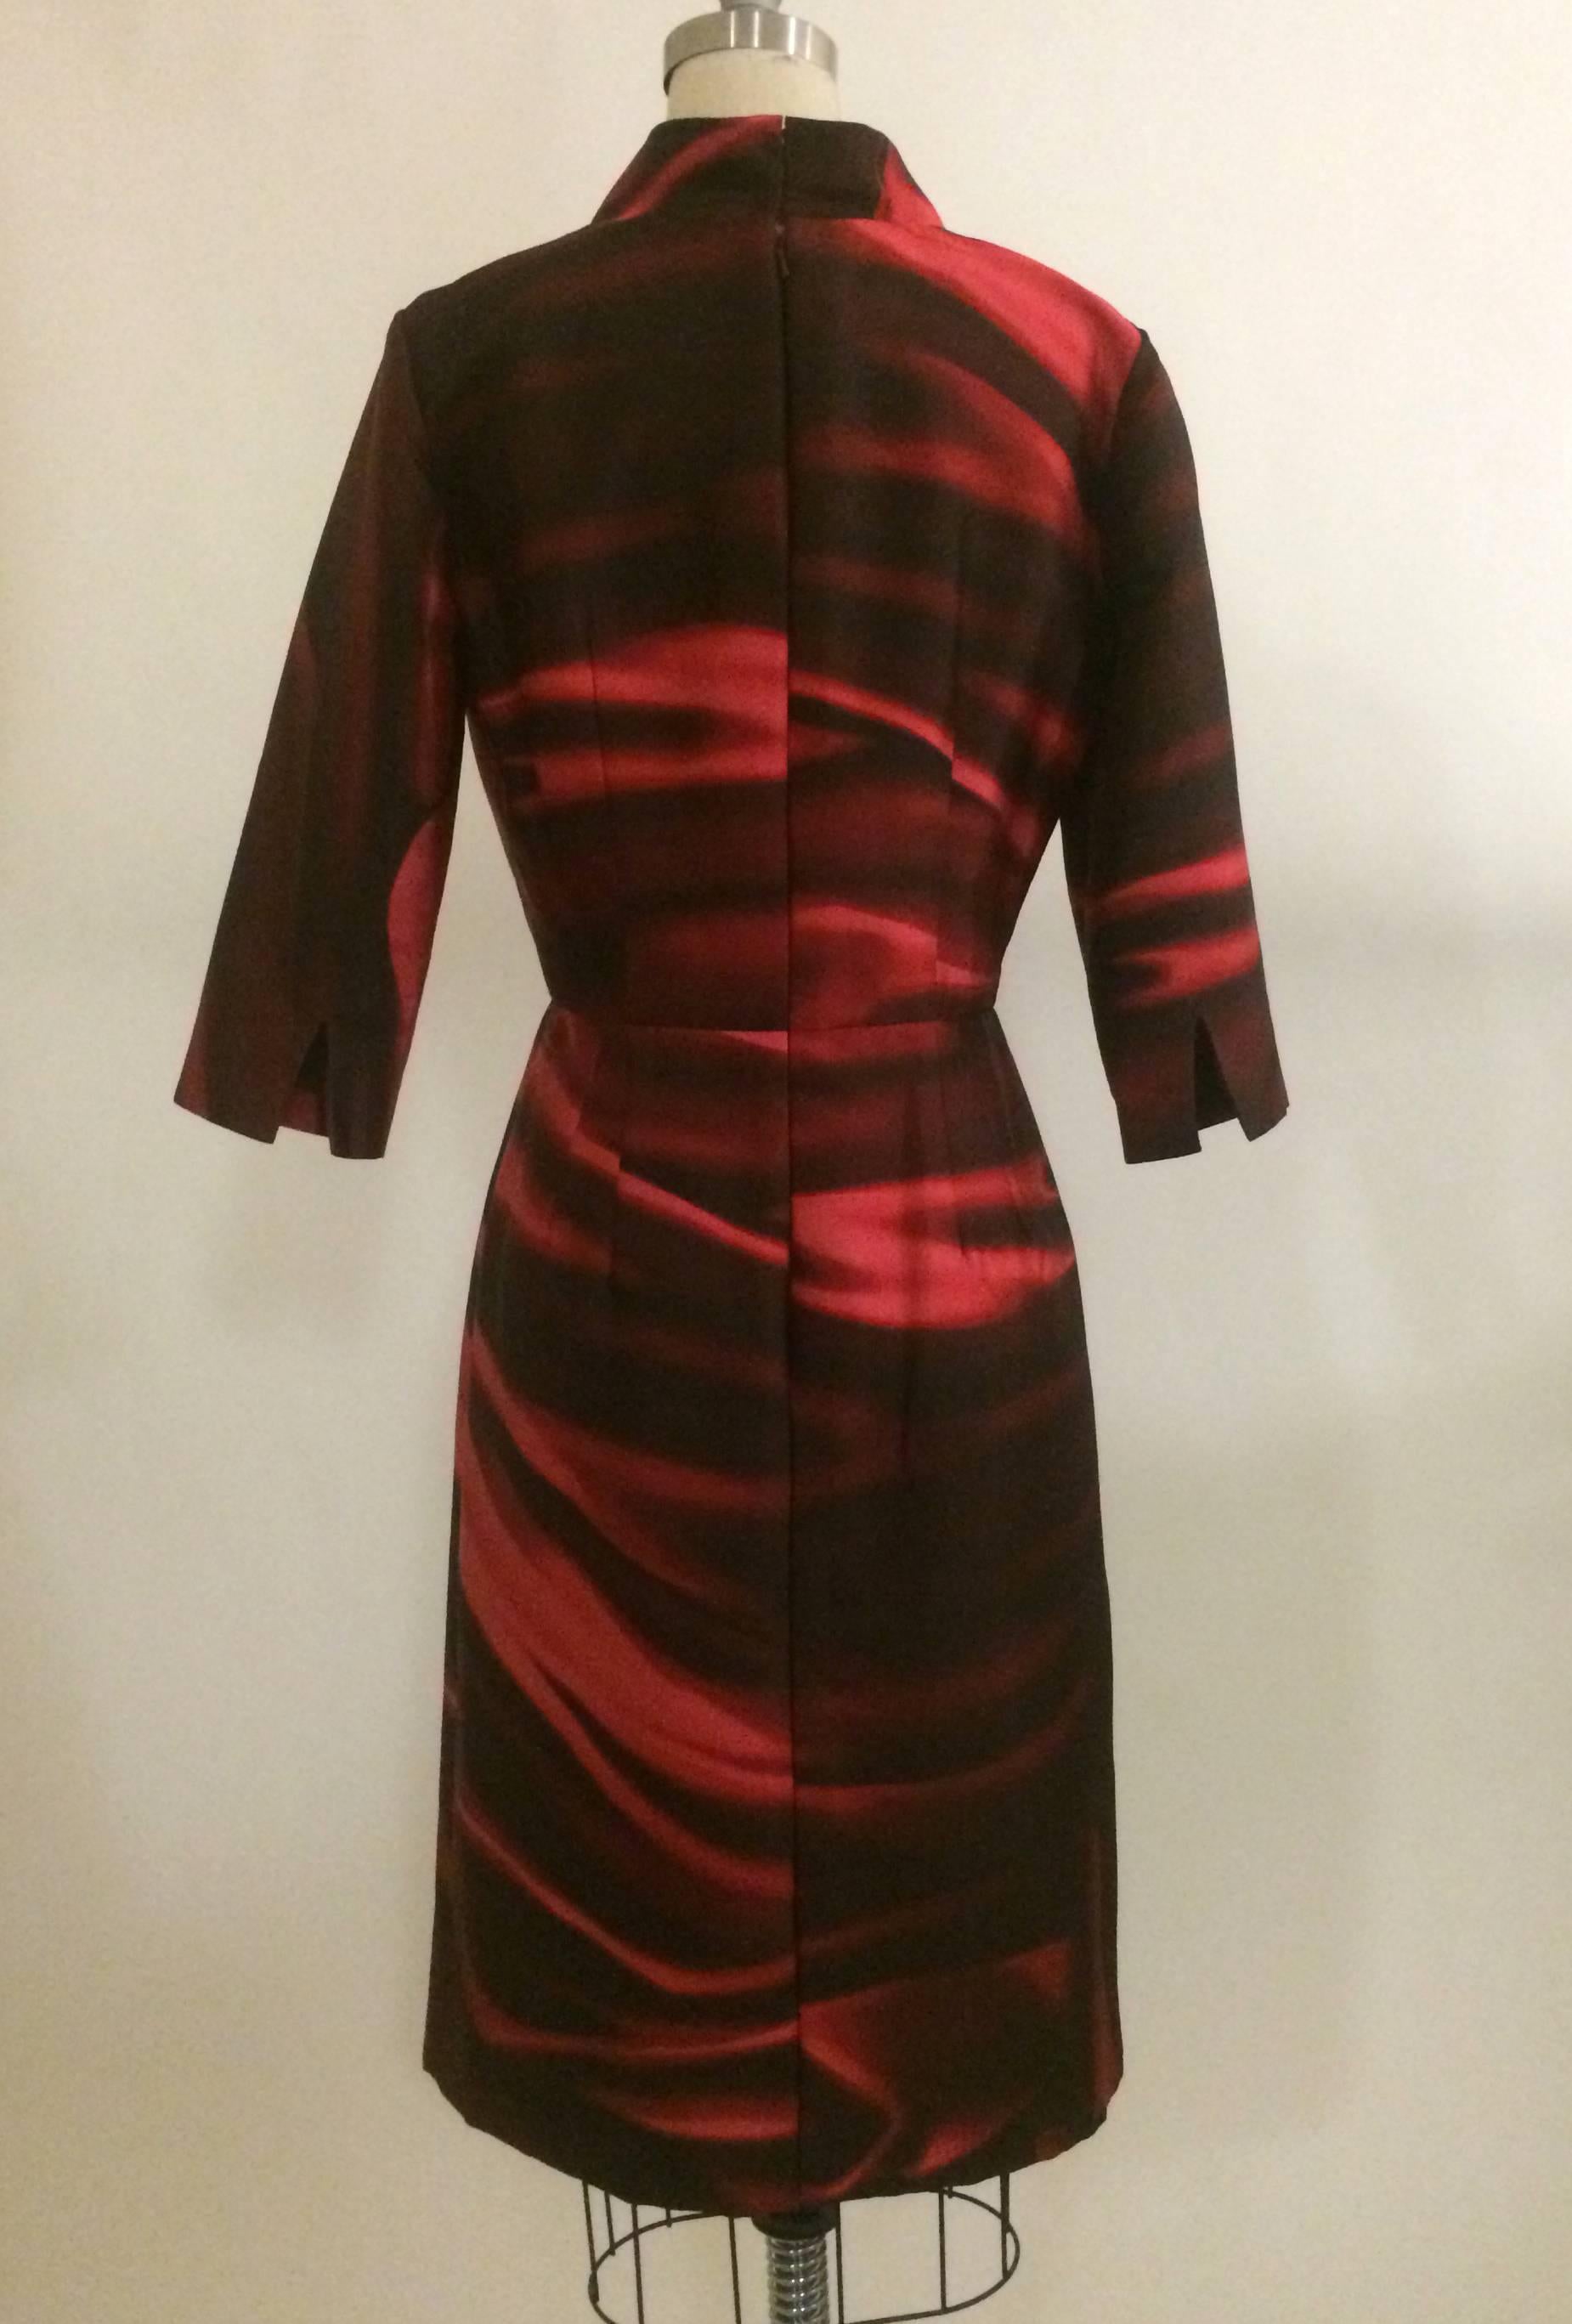 Oscar de la Renta printed silk mikado slim fit shirt dress in red/merlot. Split cuffs, fully lined. Concealed hook and zip fastenings at back. 

100% silk.
Fully lined in 100% silk. 

Made in USA.

Size 6. Non-stretchy fabric.
Bust 35